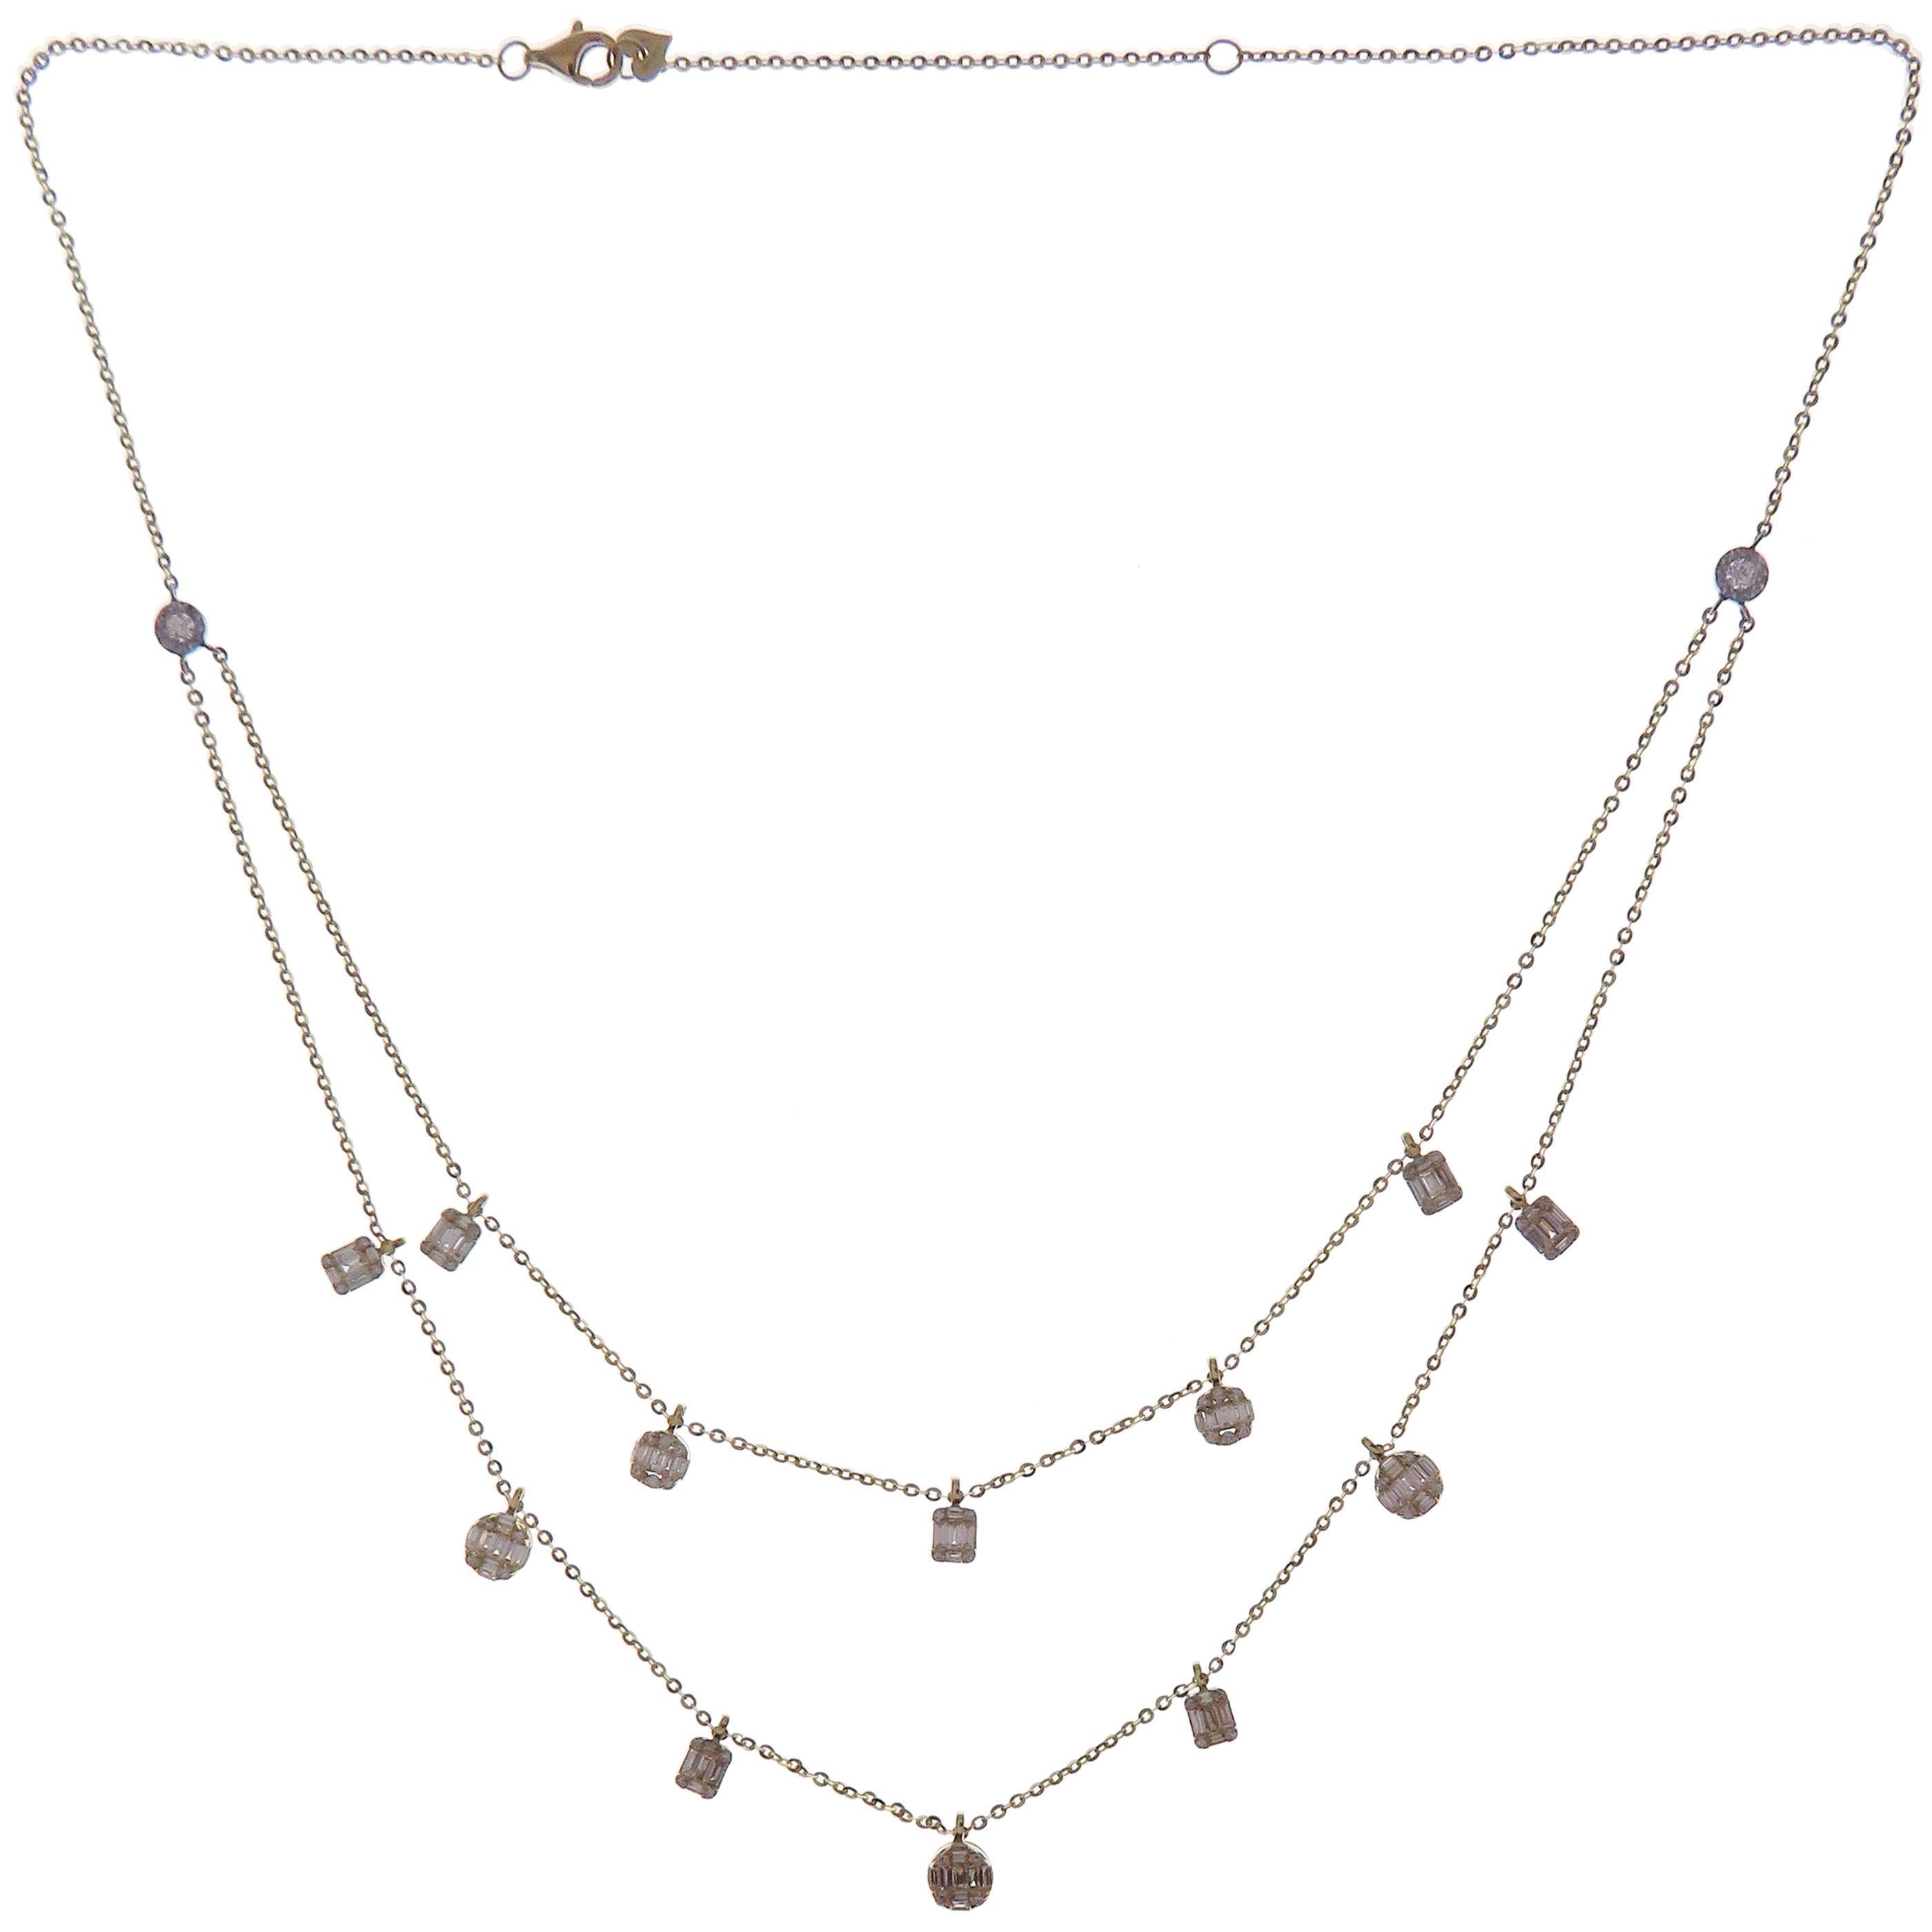 This delicate double-strand necklace is crafted in 18-karat yellow gold, weighing approximately 1.35 total carats of SI-H Quality white diamonds. 
18-karat white gold and rose gold are also available upon request.

Necklace is 16